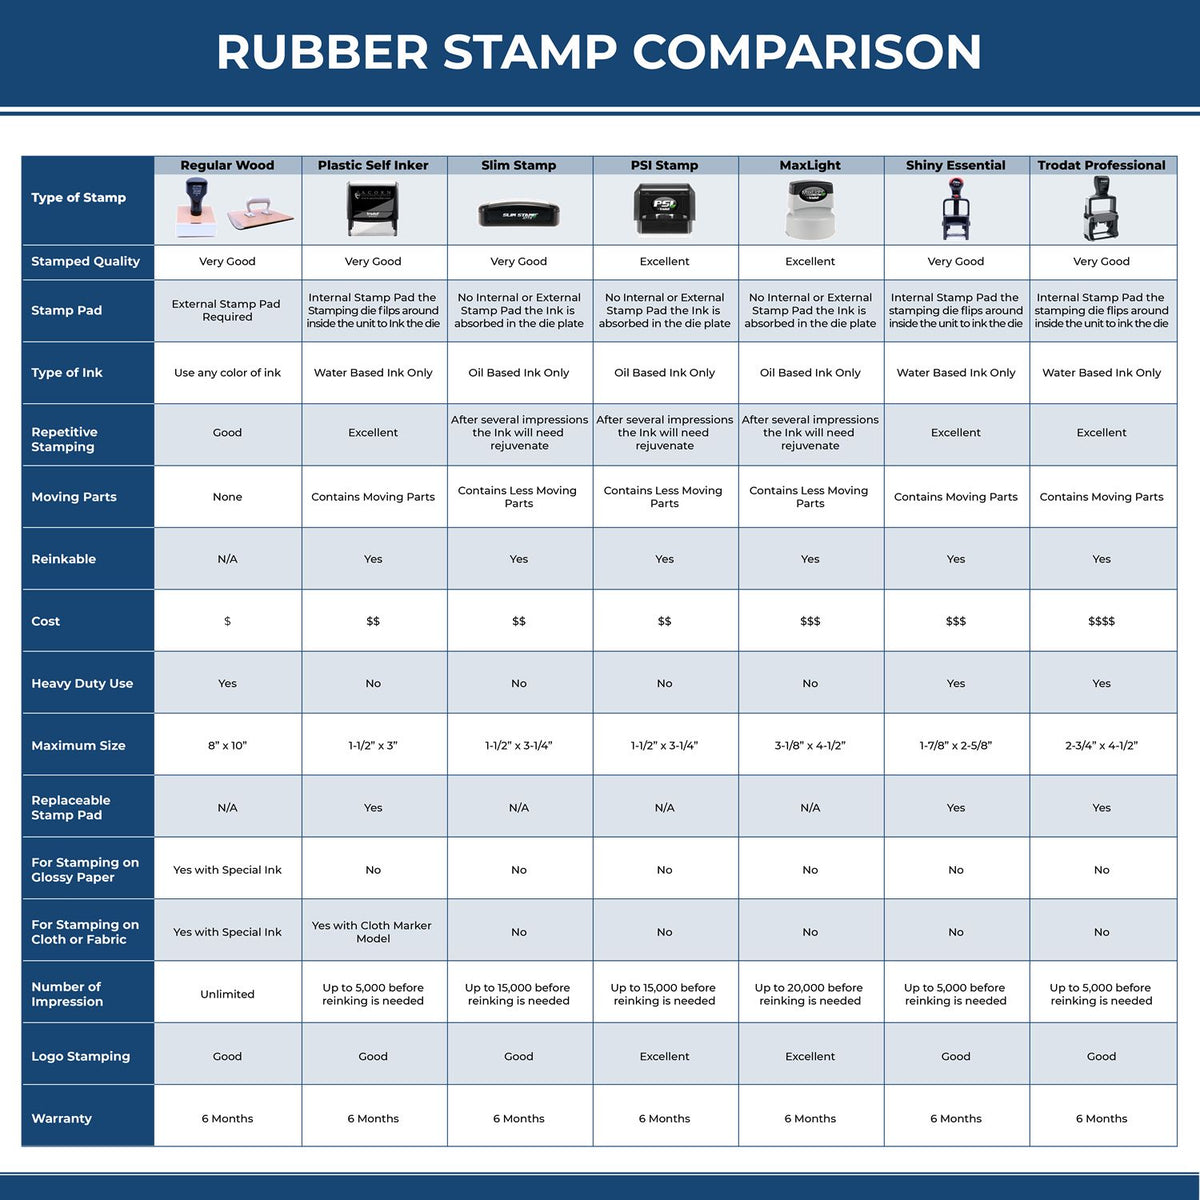 Global Air Letter Post Rubber Stamp 4405R Rubber Stamp Comparison